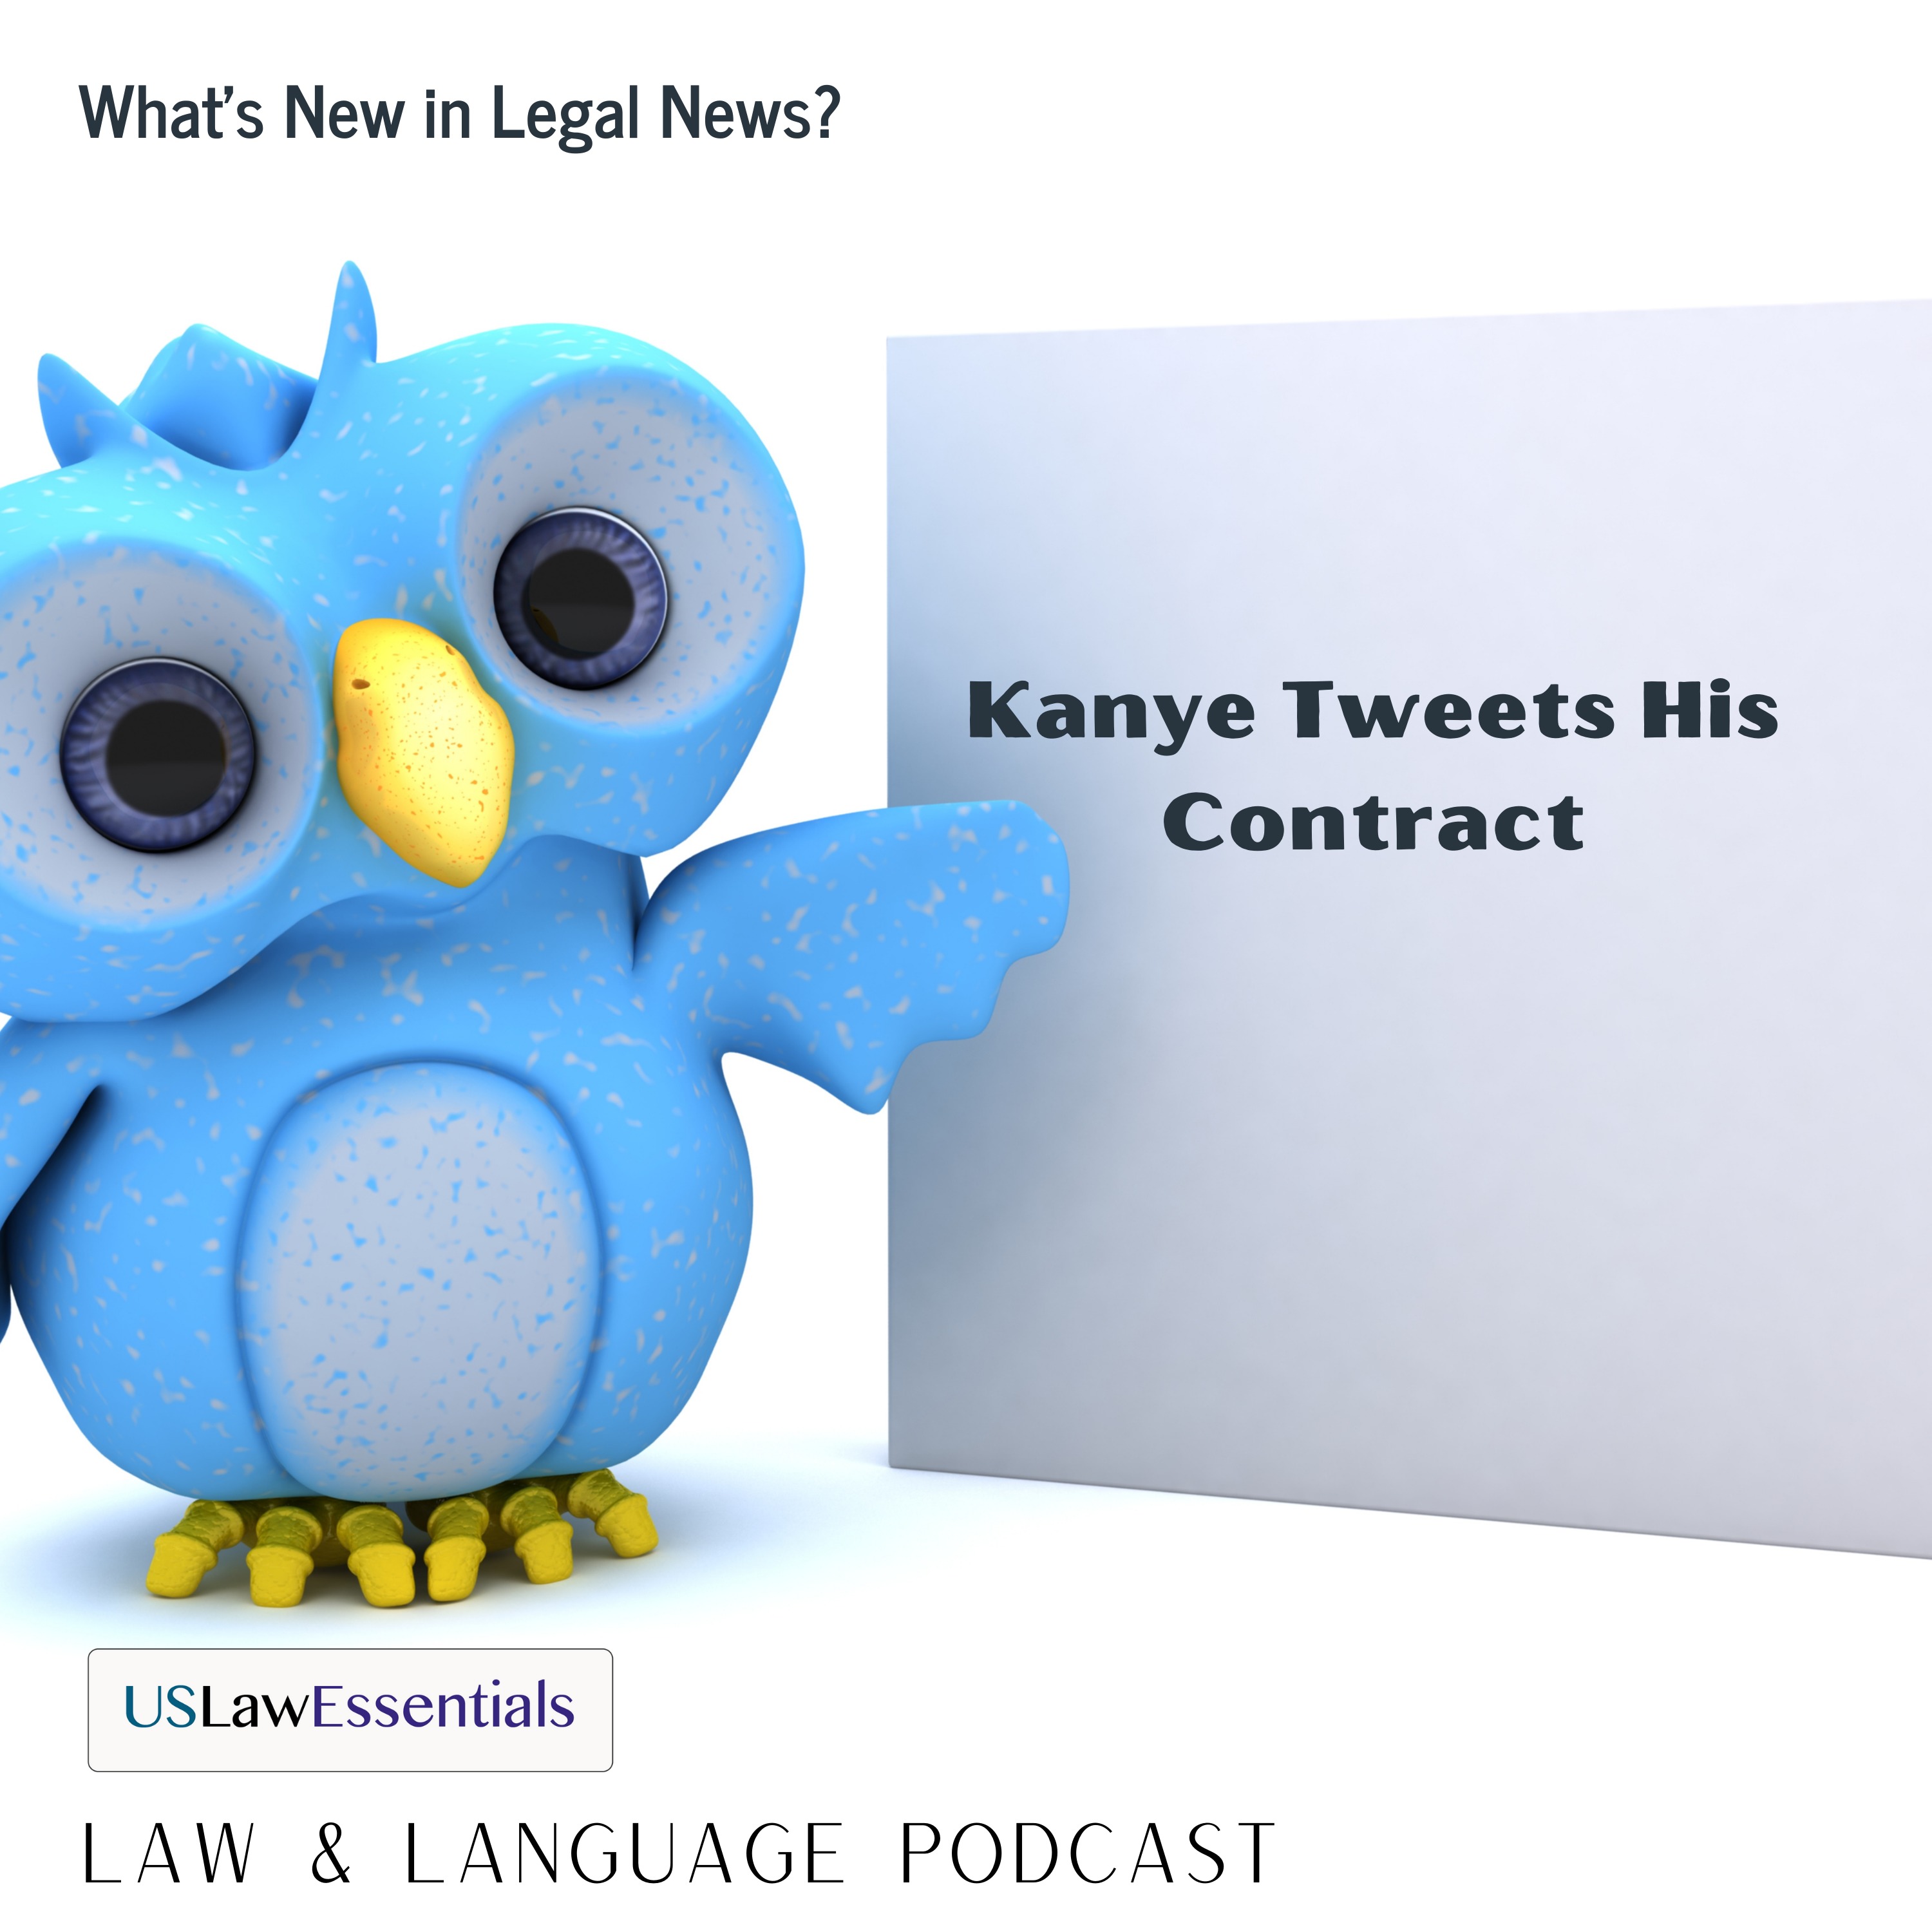 What’s New in the Legal News: Kanye Tweets His Contract